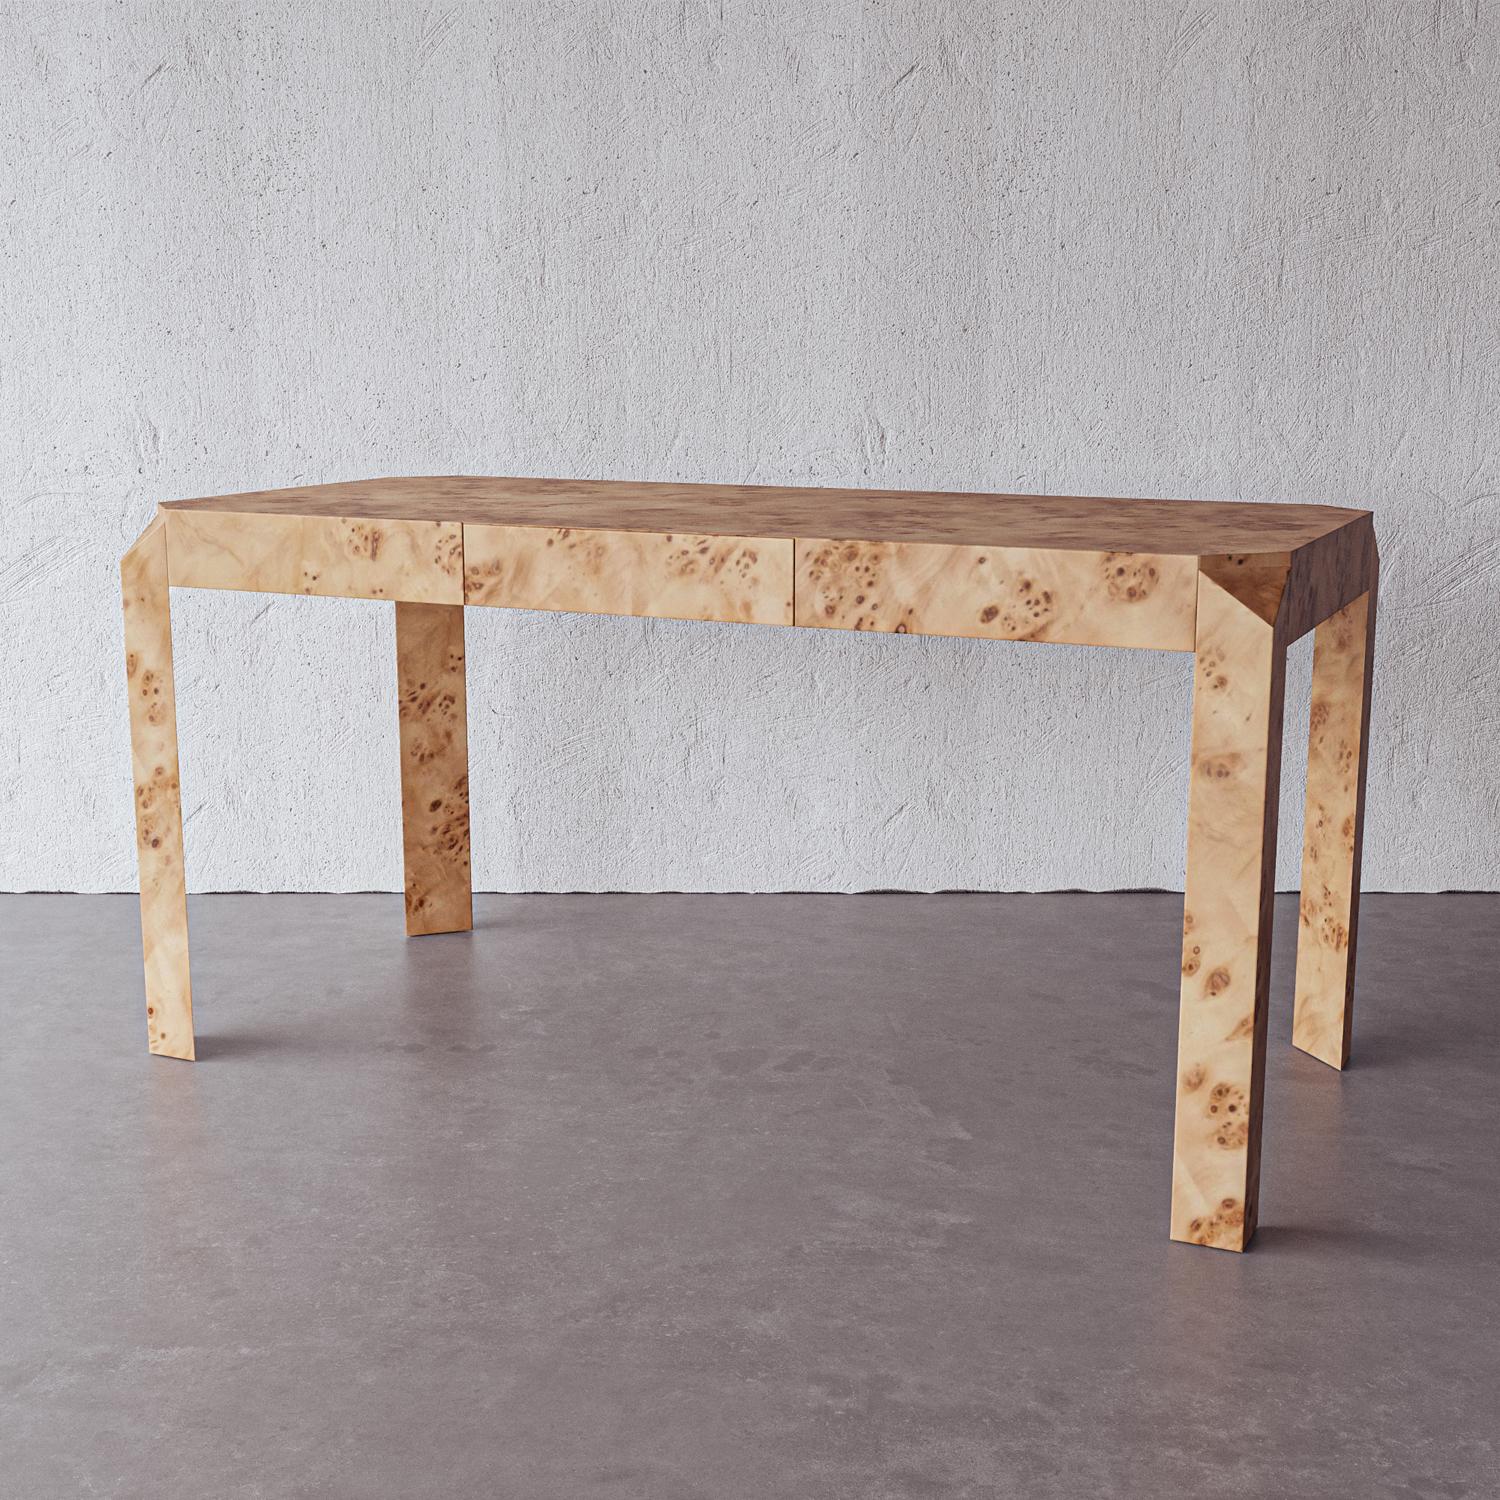 The first ready-to-assemble desk from Lemieux et Cie features angular cut corners and ample surface space for use as a table, console or vanity. A single hidden drawer adds storage space to keep your table surface organized. Handmade by artisans in